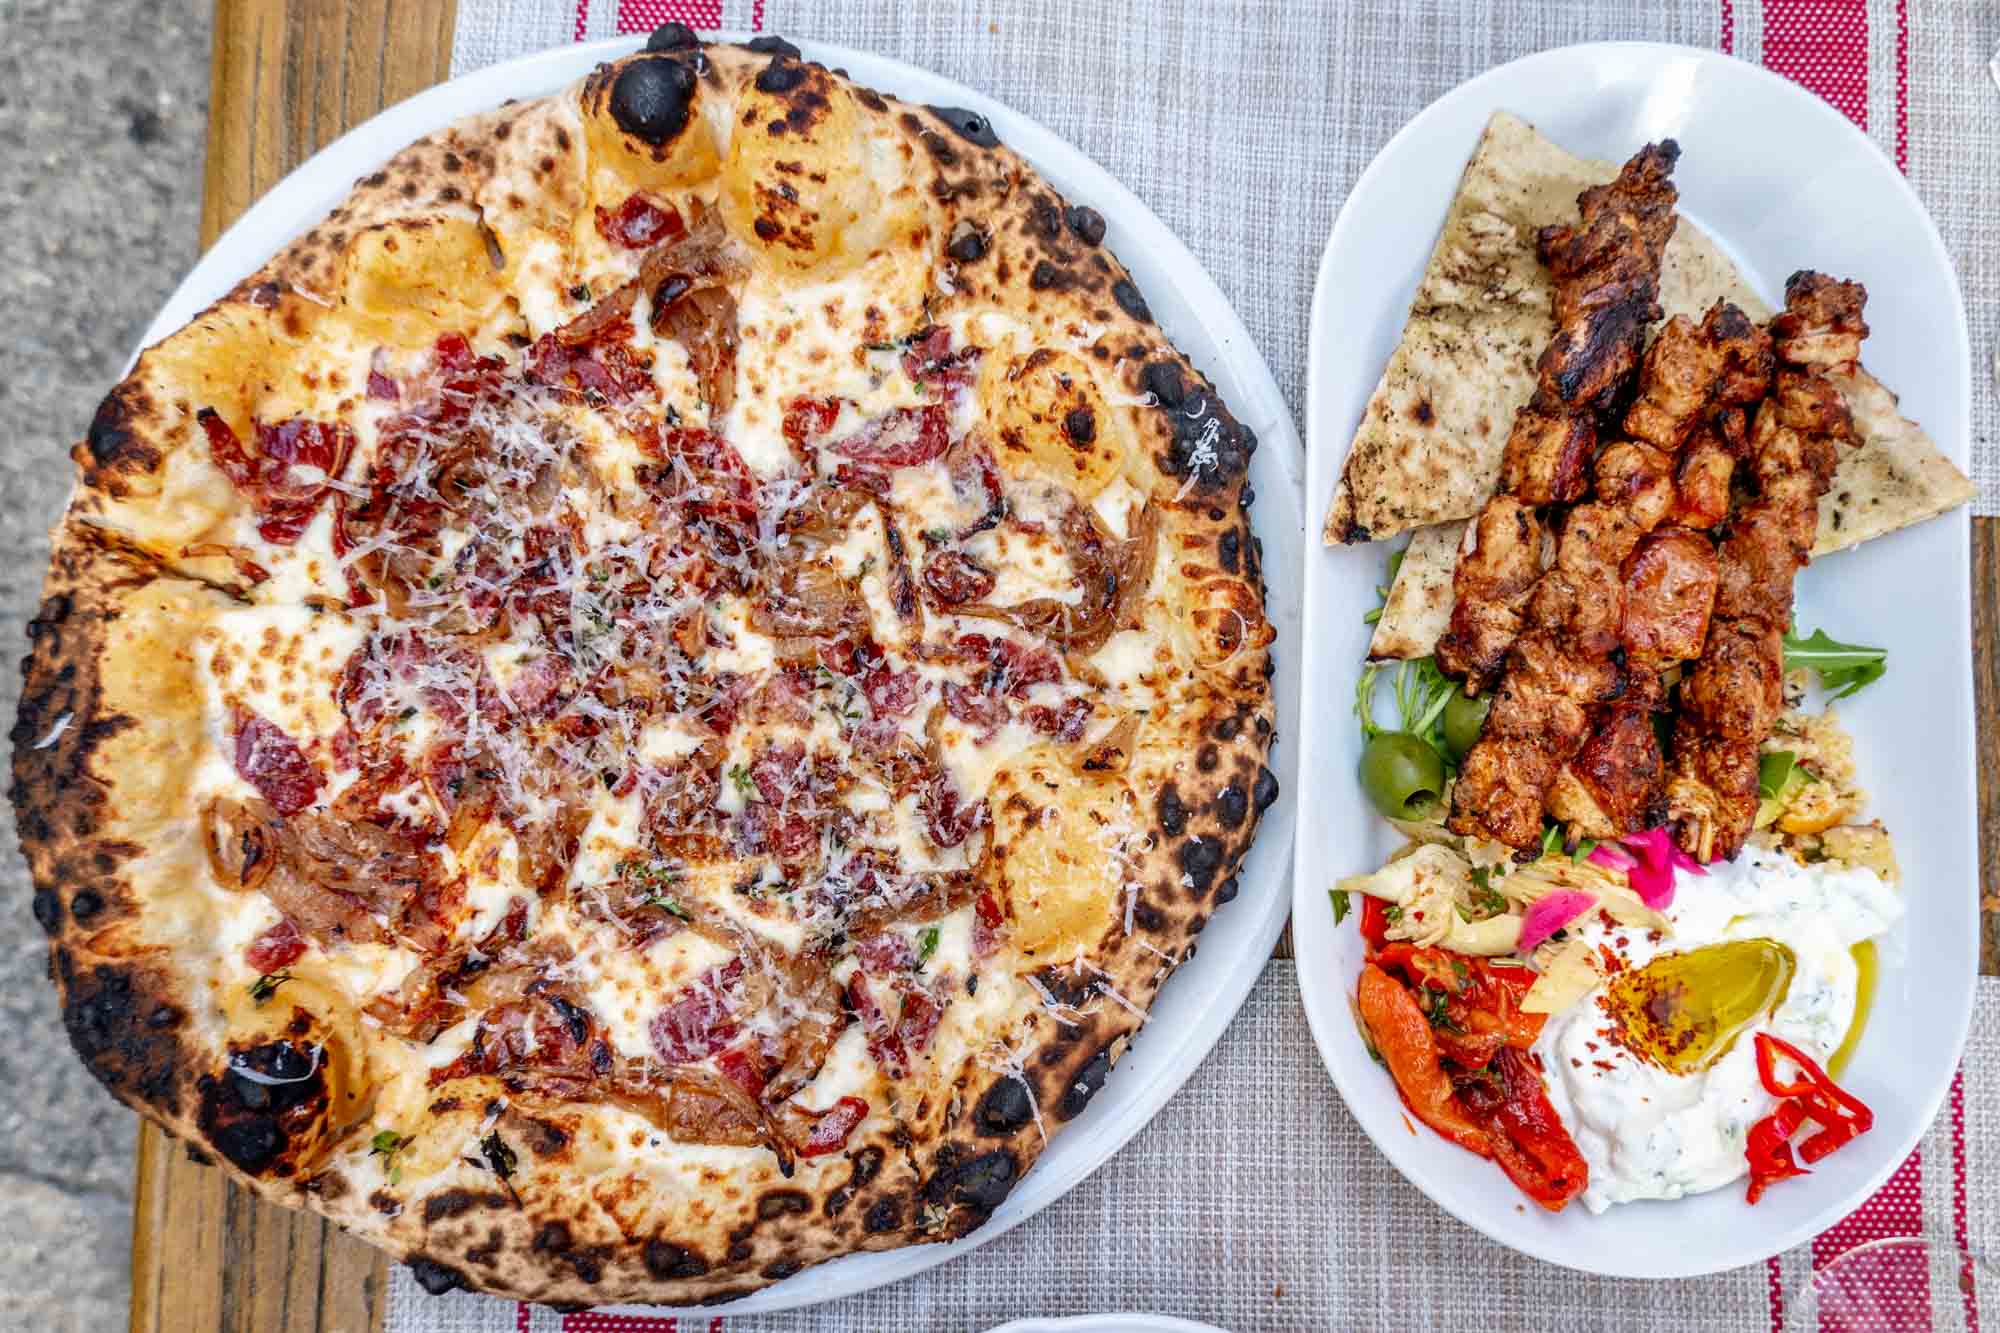 Pizza and chicken skewers on plates